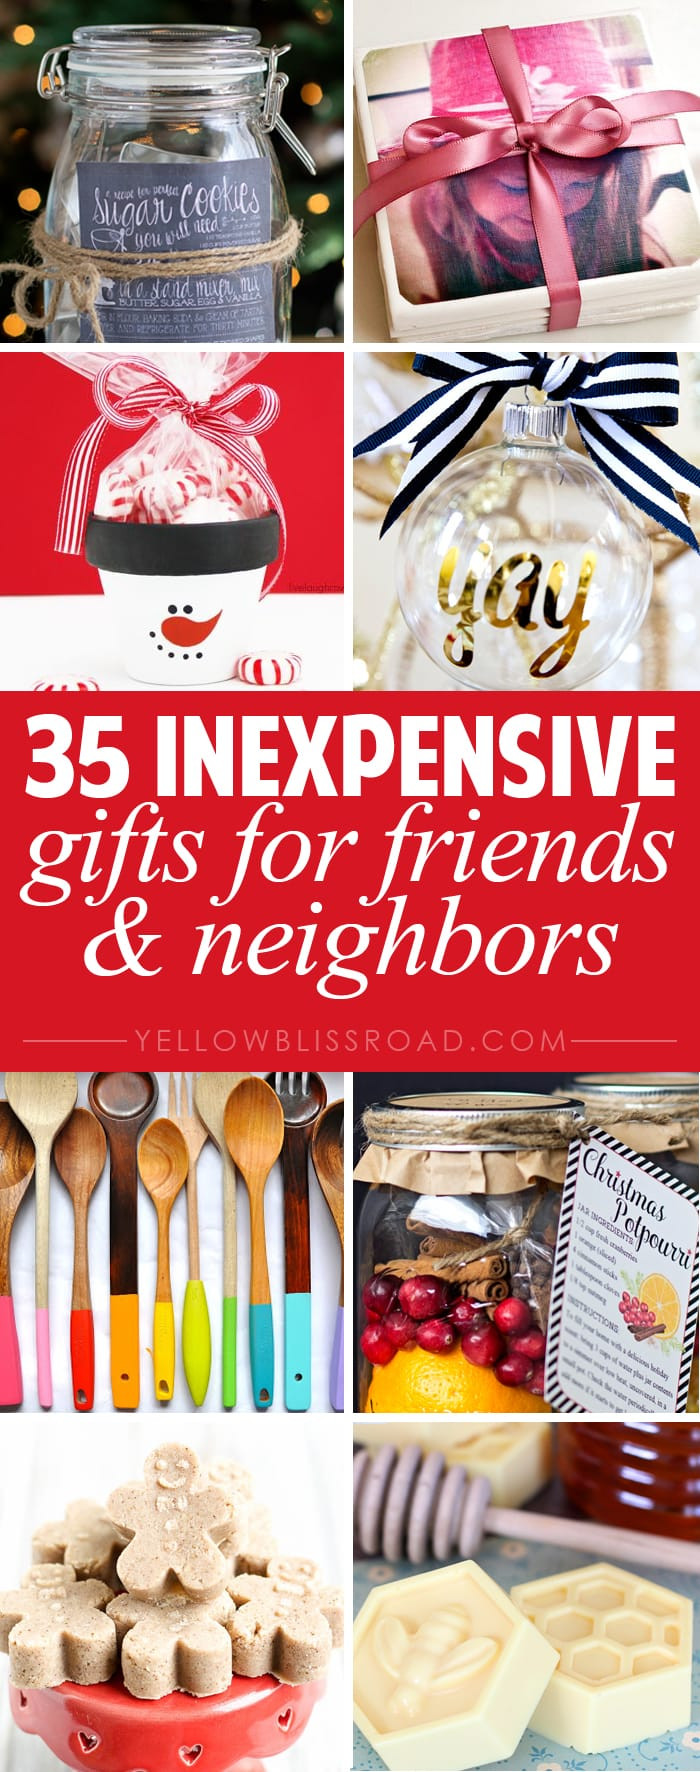 DIY Christmas Presents For Friends
 35 Gift Ideas for Neighbors and Friends Yellow Bliss Road